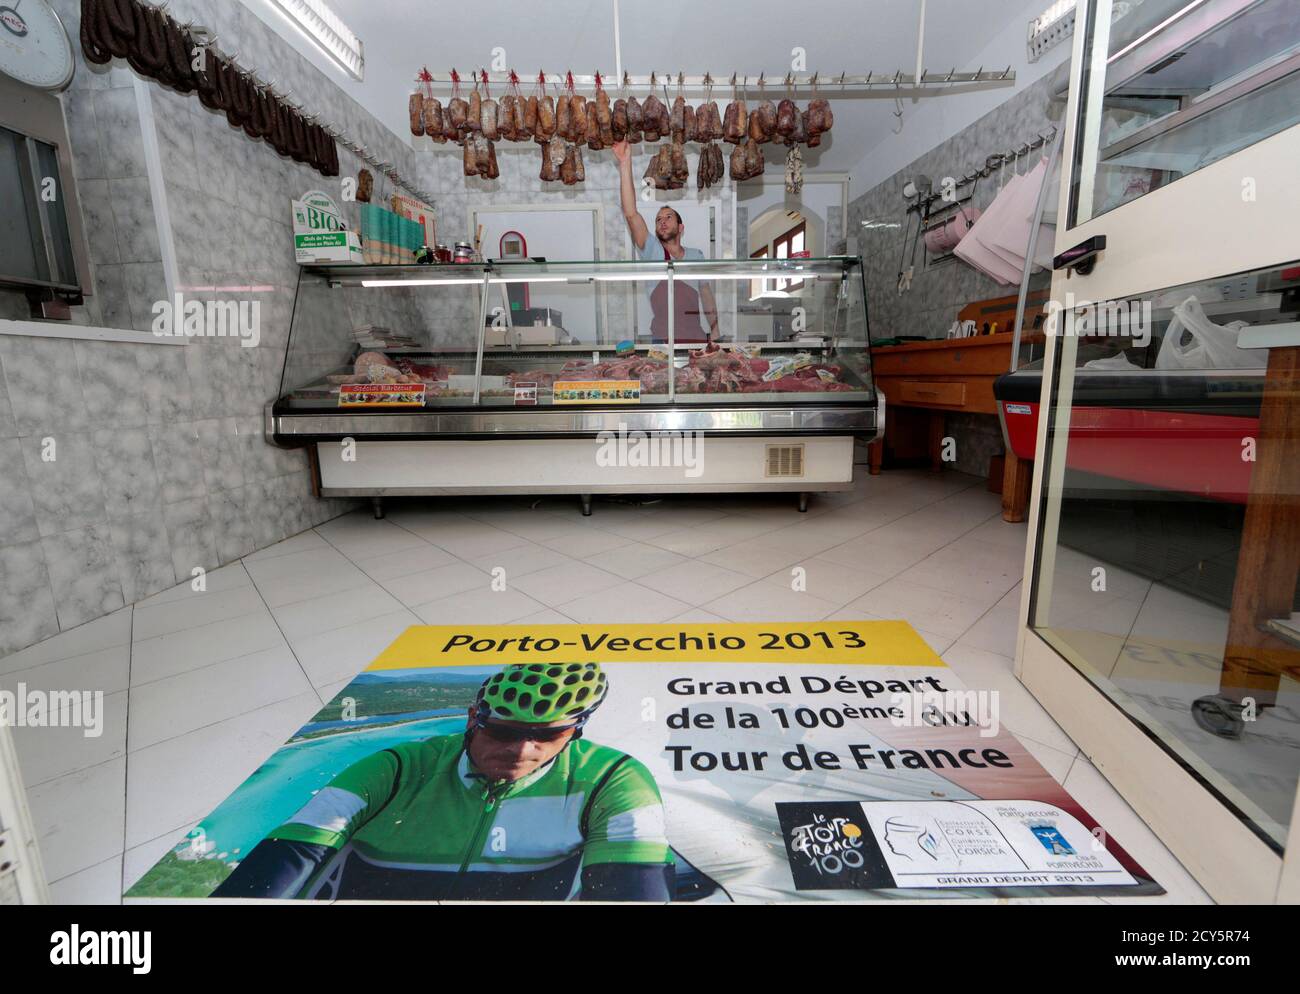 Tour De France Poster High Resolution Stock Photography And Images Alamy